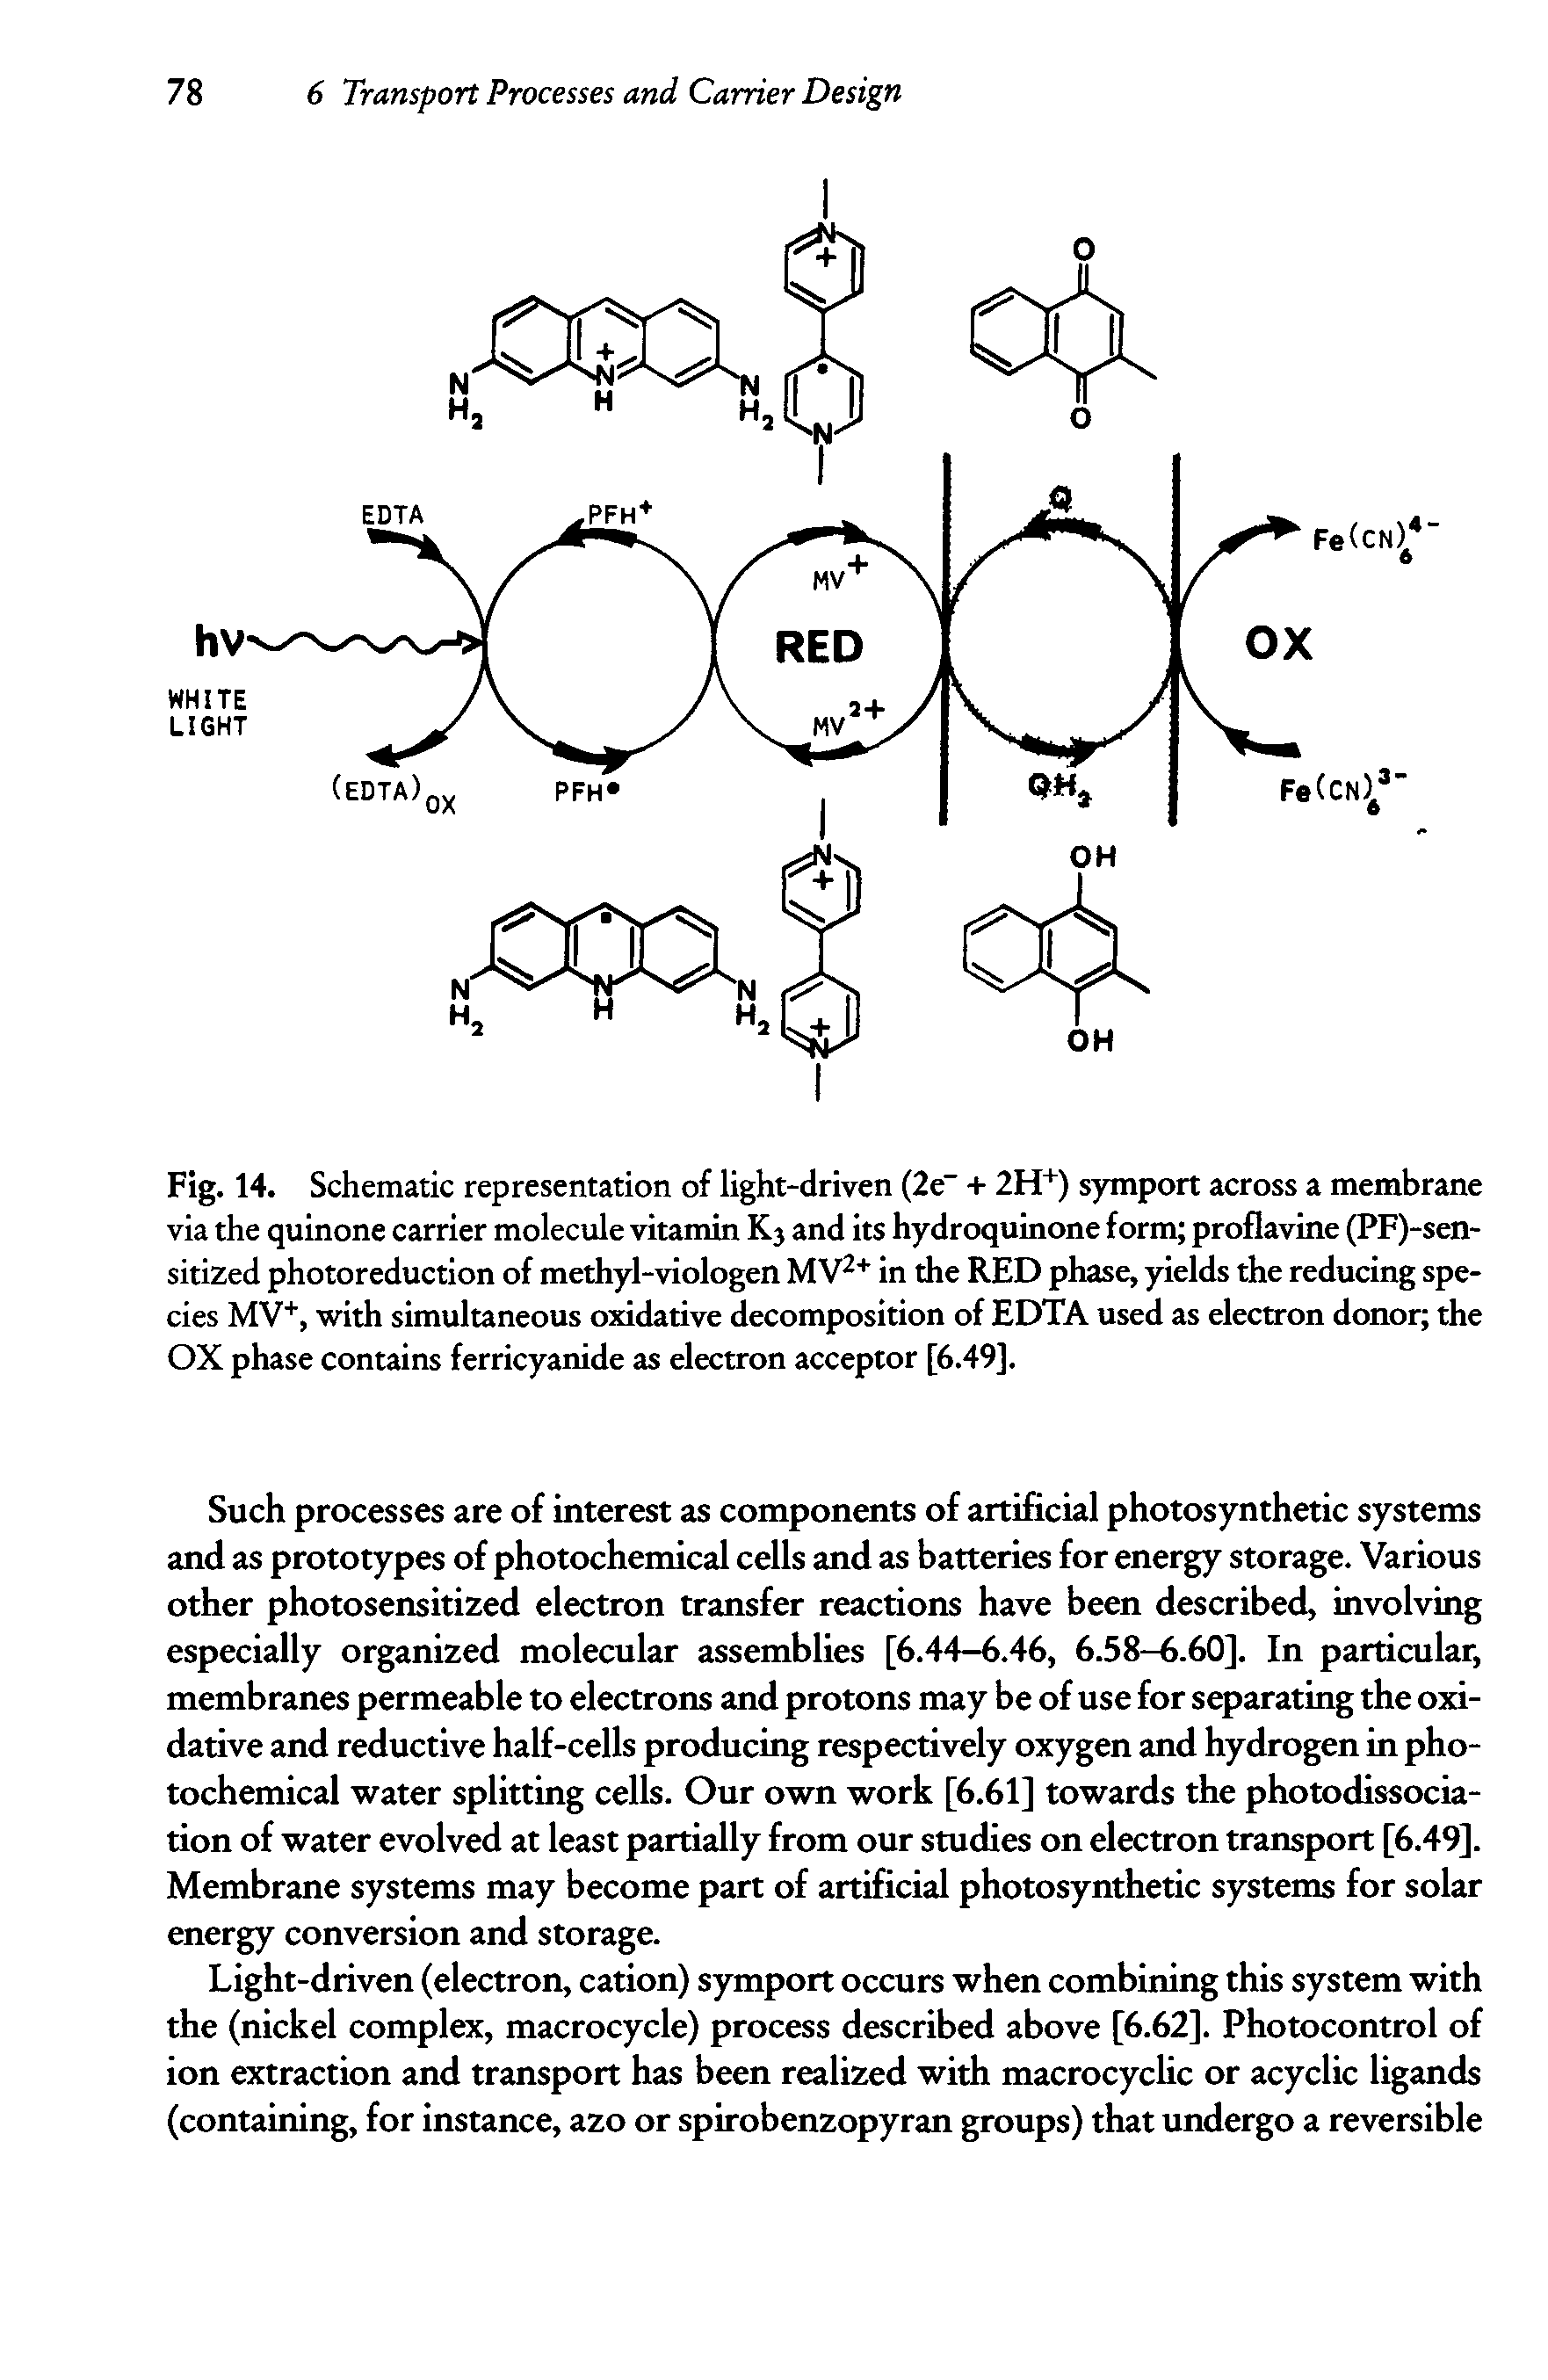 Fig. 14. Schematic representation of light-driven (2e + 2H+) symport across a membrane via the quinone carrier molecule vitamin Kj and its hydroquinone form proflavine (PF)-sen-sitized photoreduction of methyl-viologen MV2+ in the RED phase, yields the reducing species MV+, with simultaneous oxidative decomposition of EDTA used as electron donor the OX phase contains ferricyanide as electron acceptor [6.49].